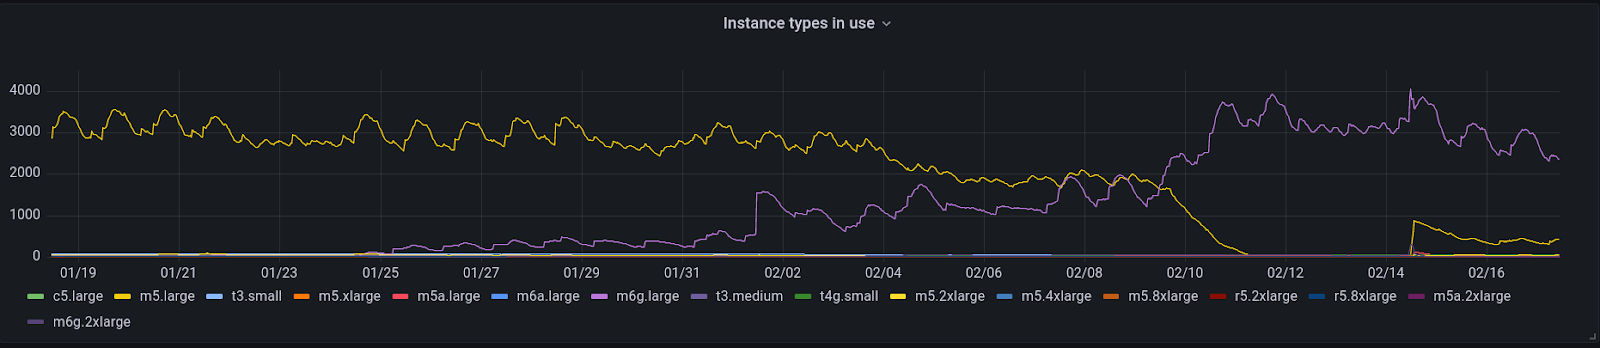 Instance types in use over the period 19th January - 16th February 2022